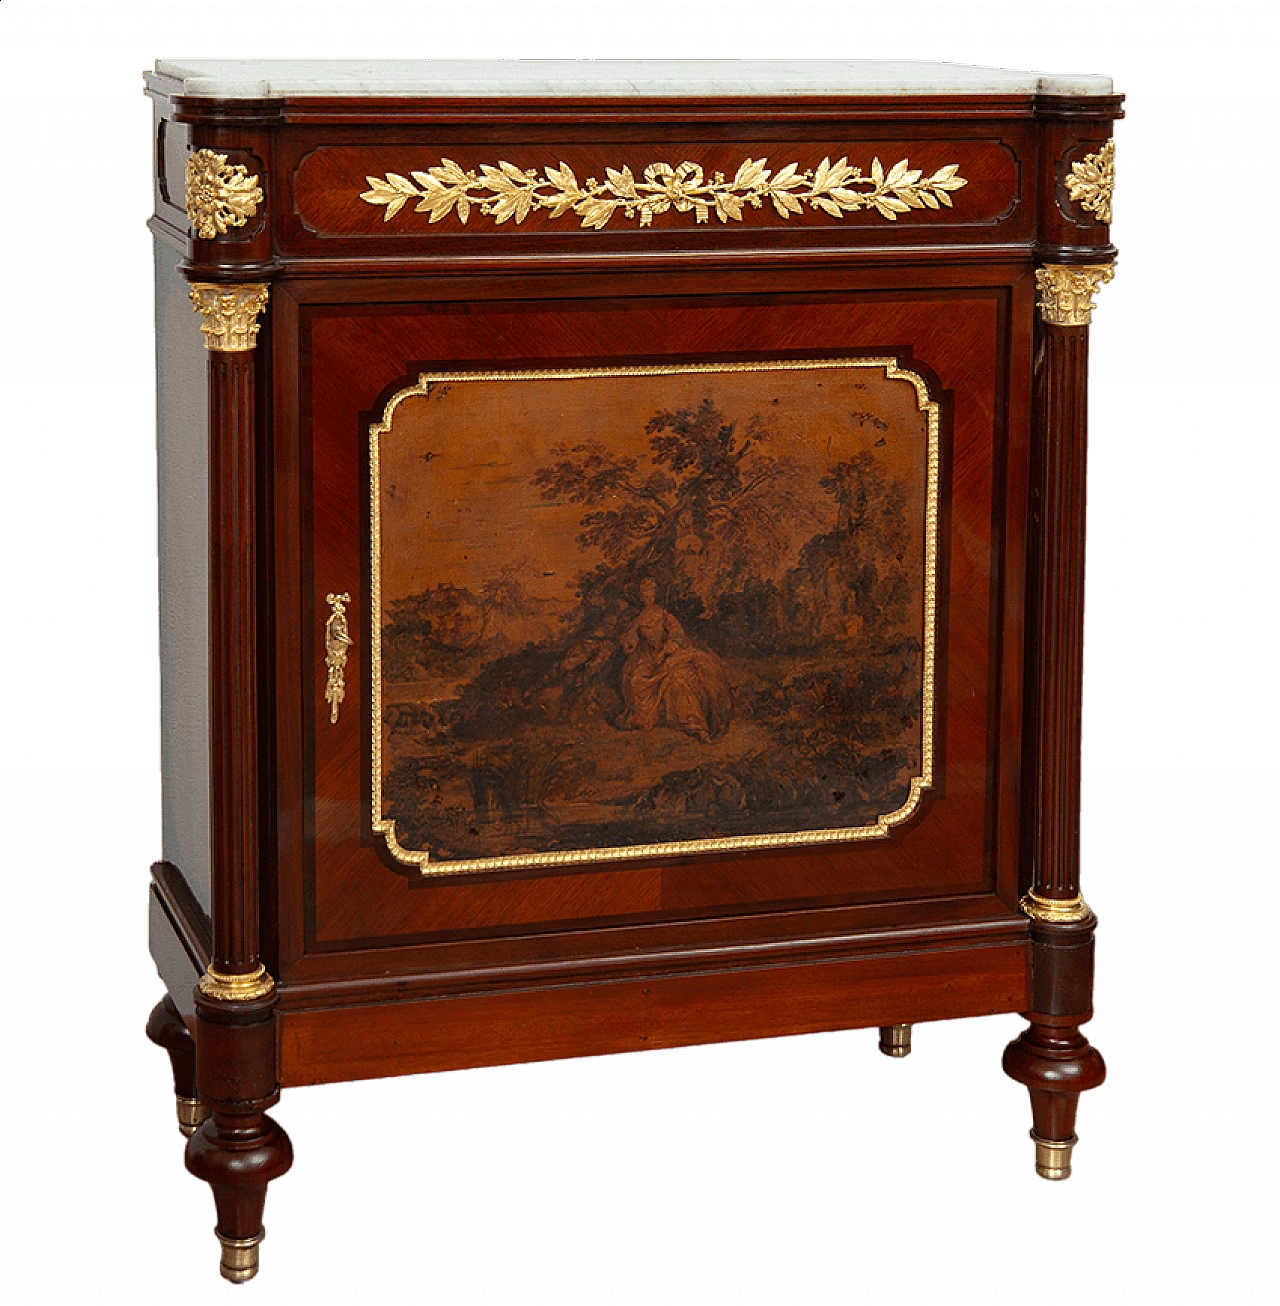 Napoleon III sideboard in Vernis Martin style painted wood, 19th century 7